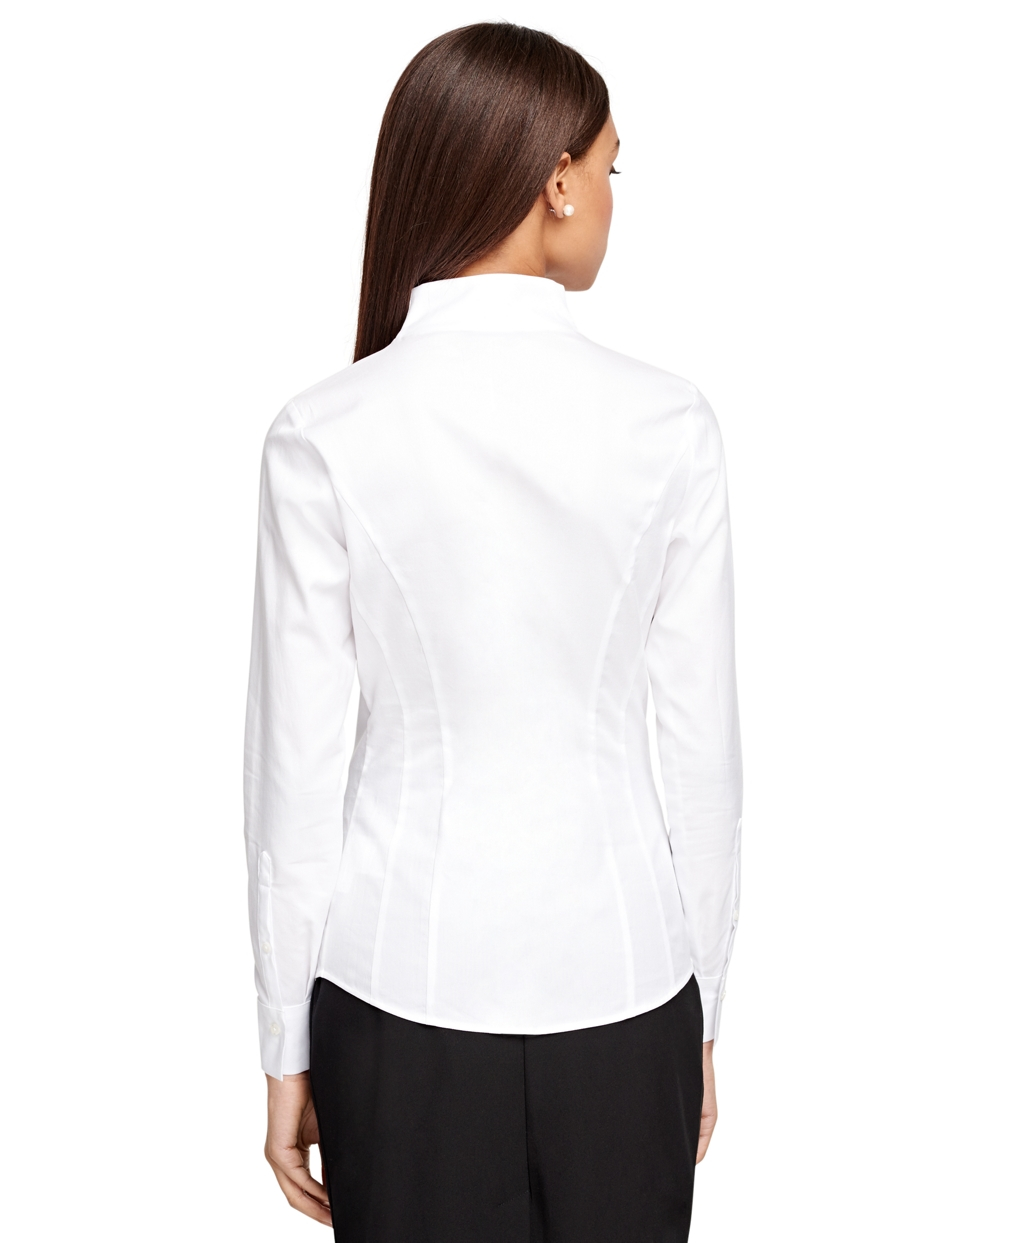 Lyst - Brooks Brothers Collarless Dress Shirt in White